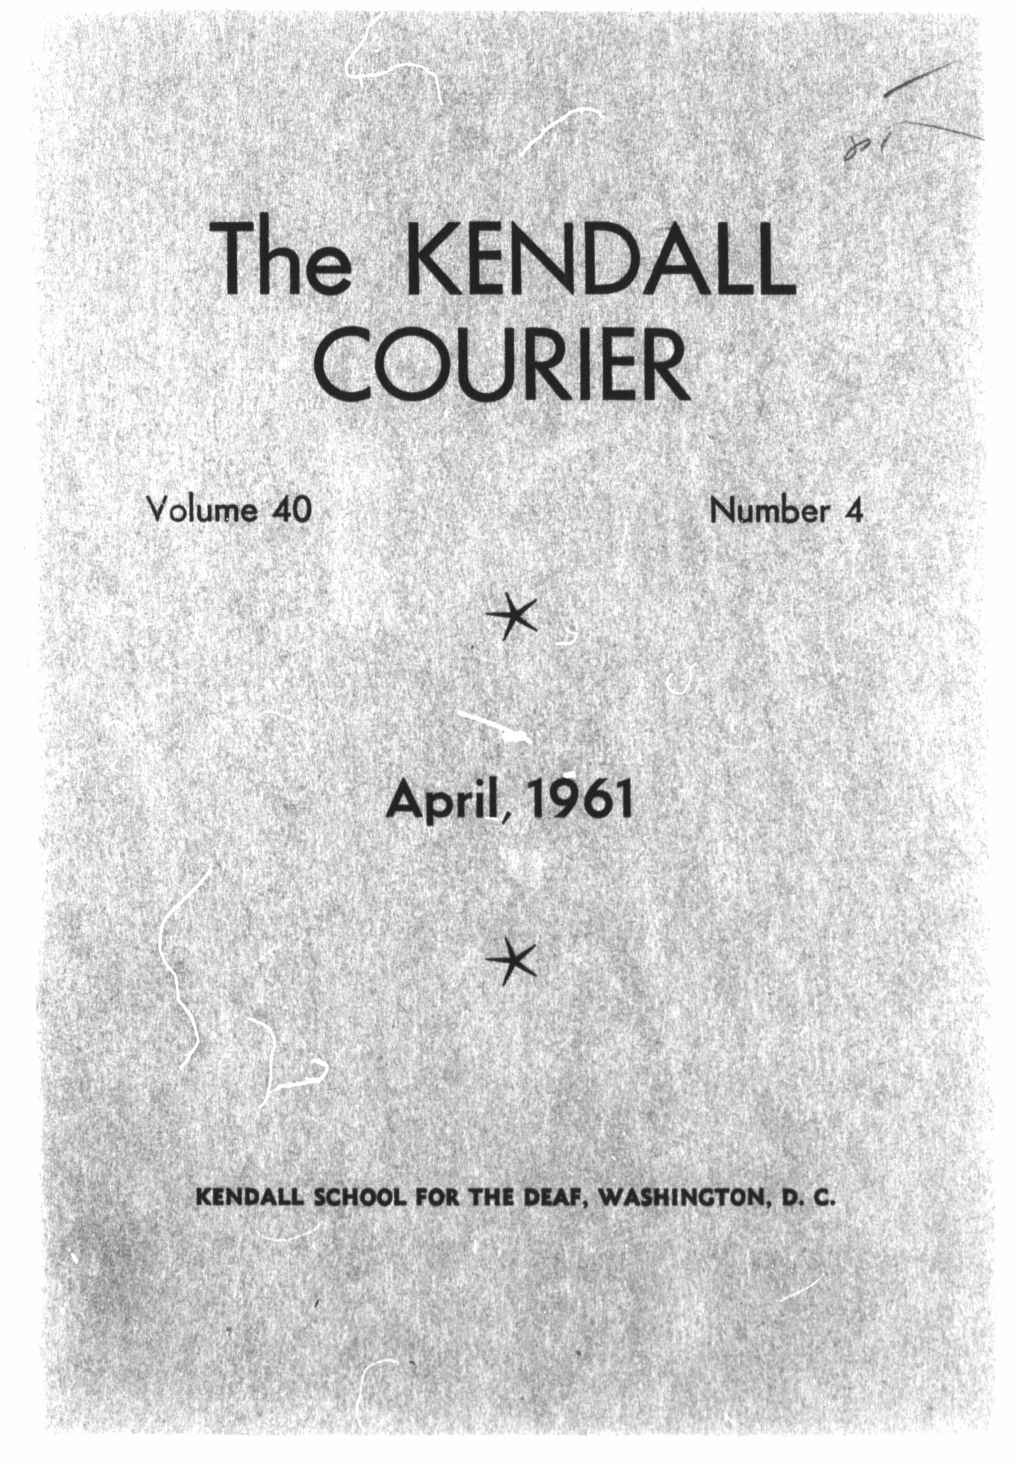 THE KENDALL COURIER, Kendall School for the Deaf, Seventh Street and Florida Avenue, N.E